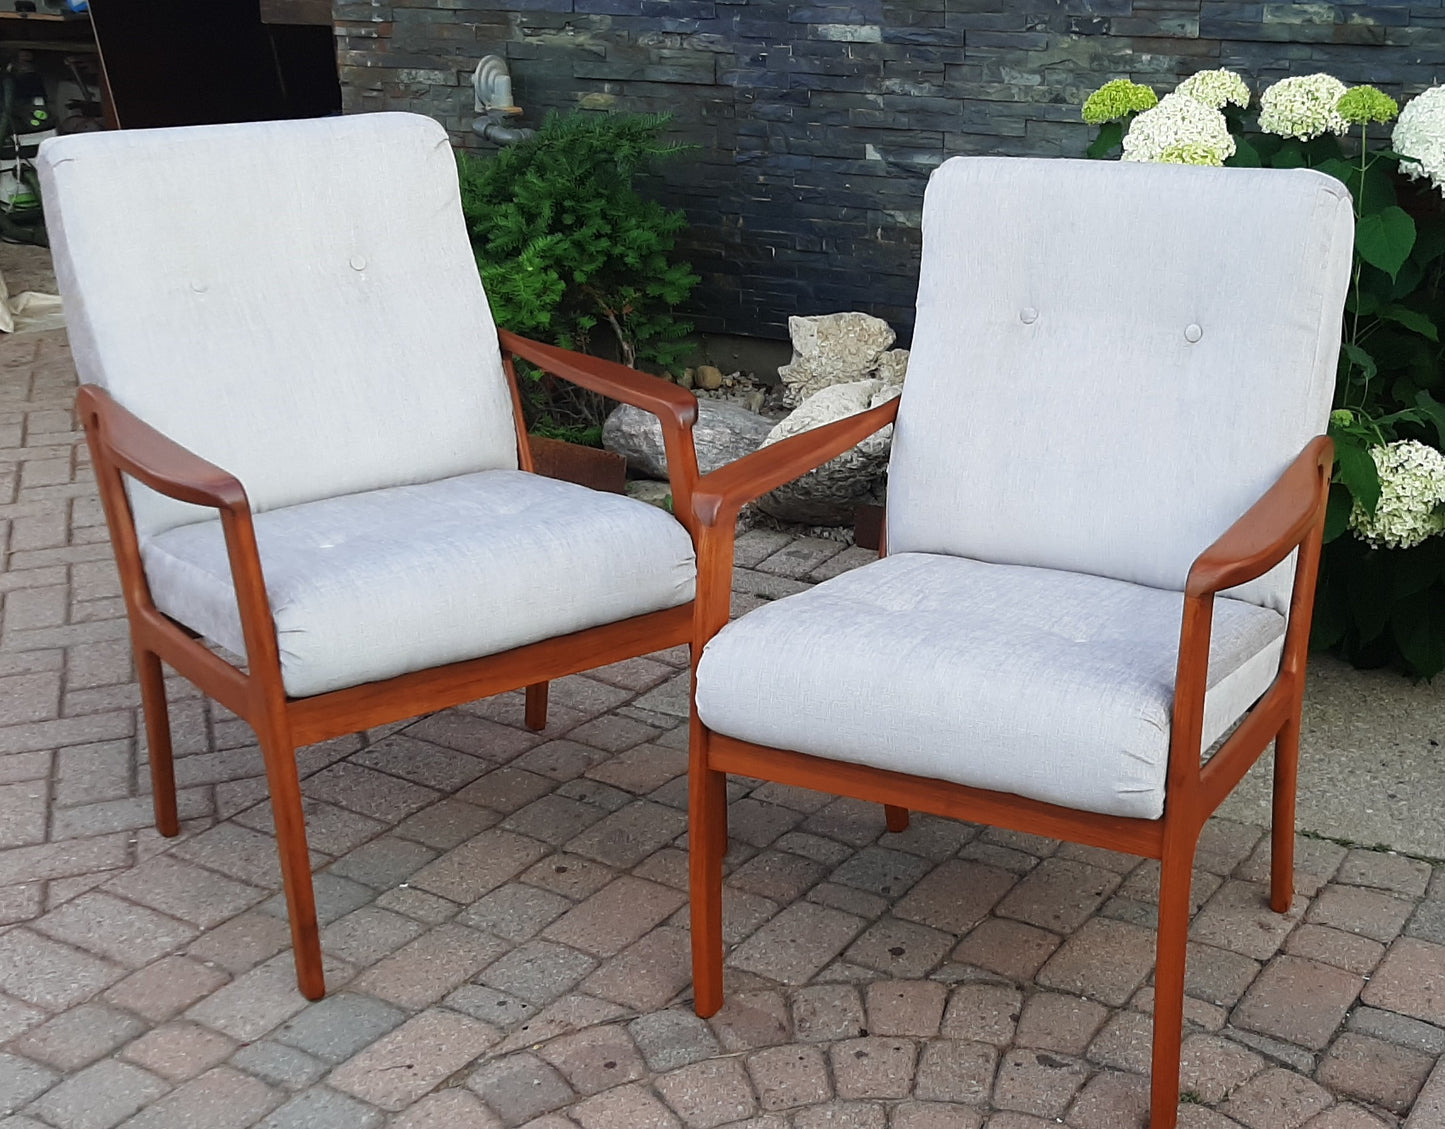 REFINISHED REUPHOLSTERED Pair of Mid Century Modern Teak Armchairs,  Perfect